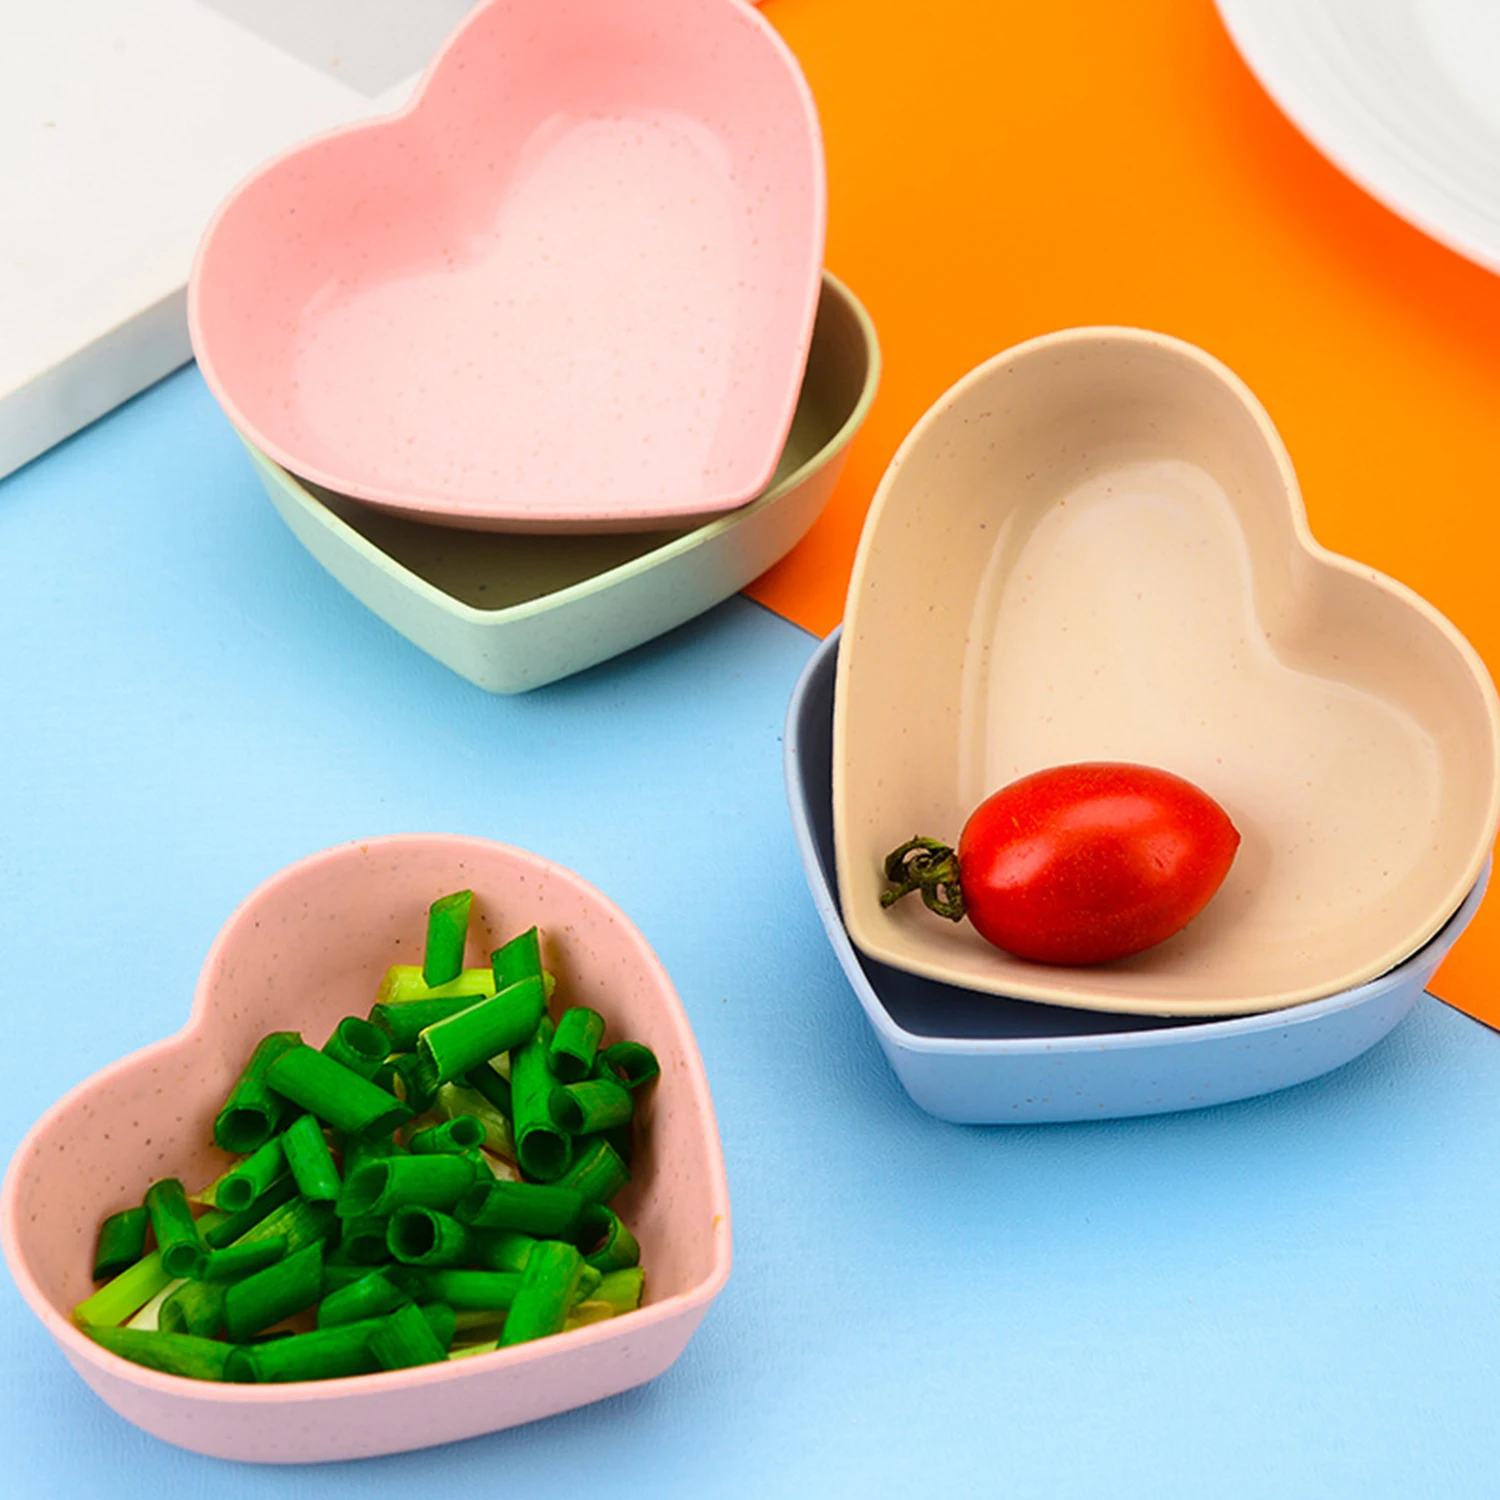 

Tableware Bowl Heart Shape Lightweight Seasoning Bowl Food Sauce Dish Appetizer Plates for Kitchen tools Kitchen Accessories